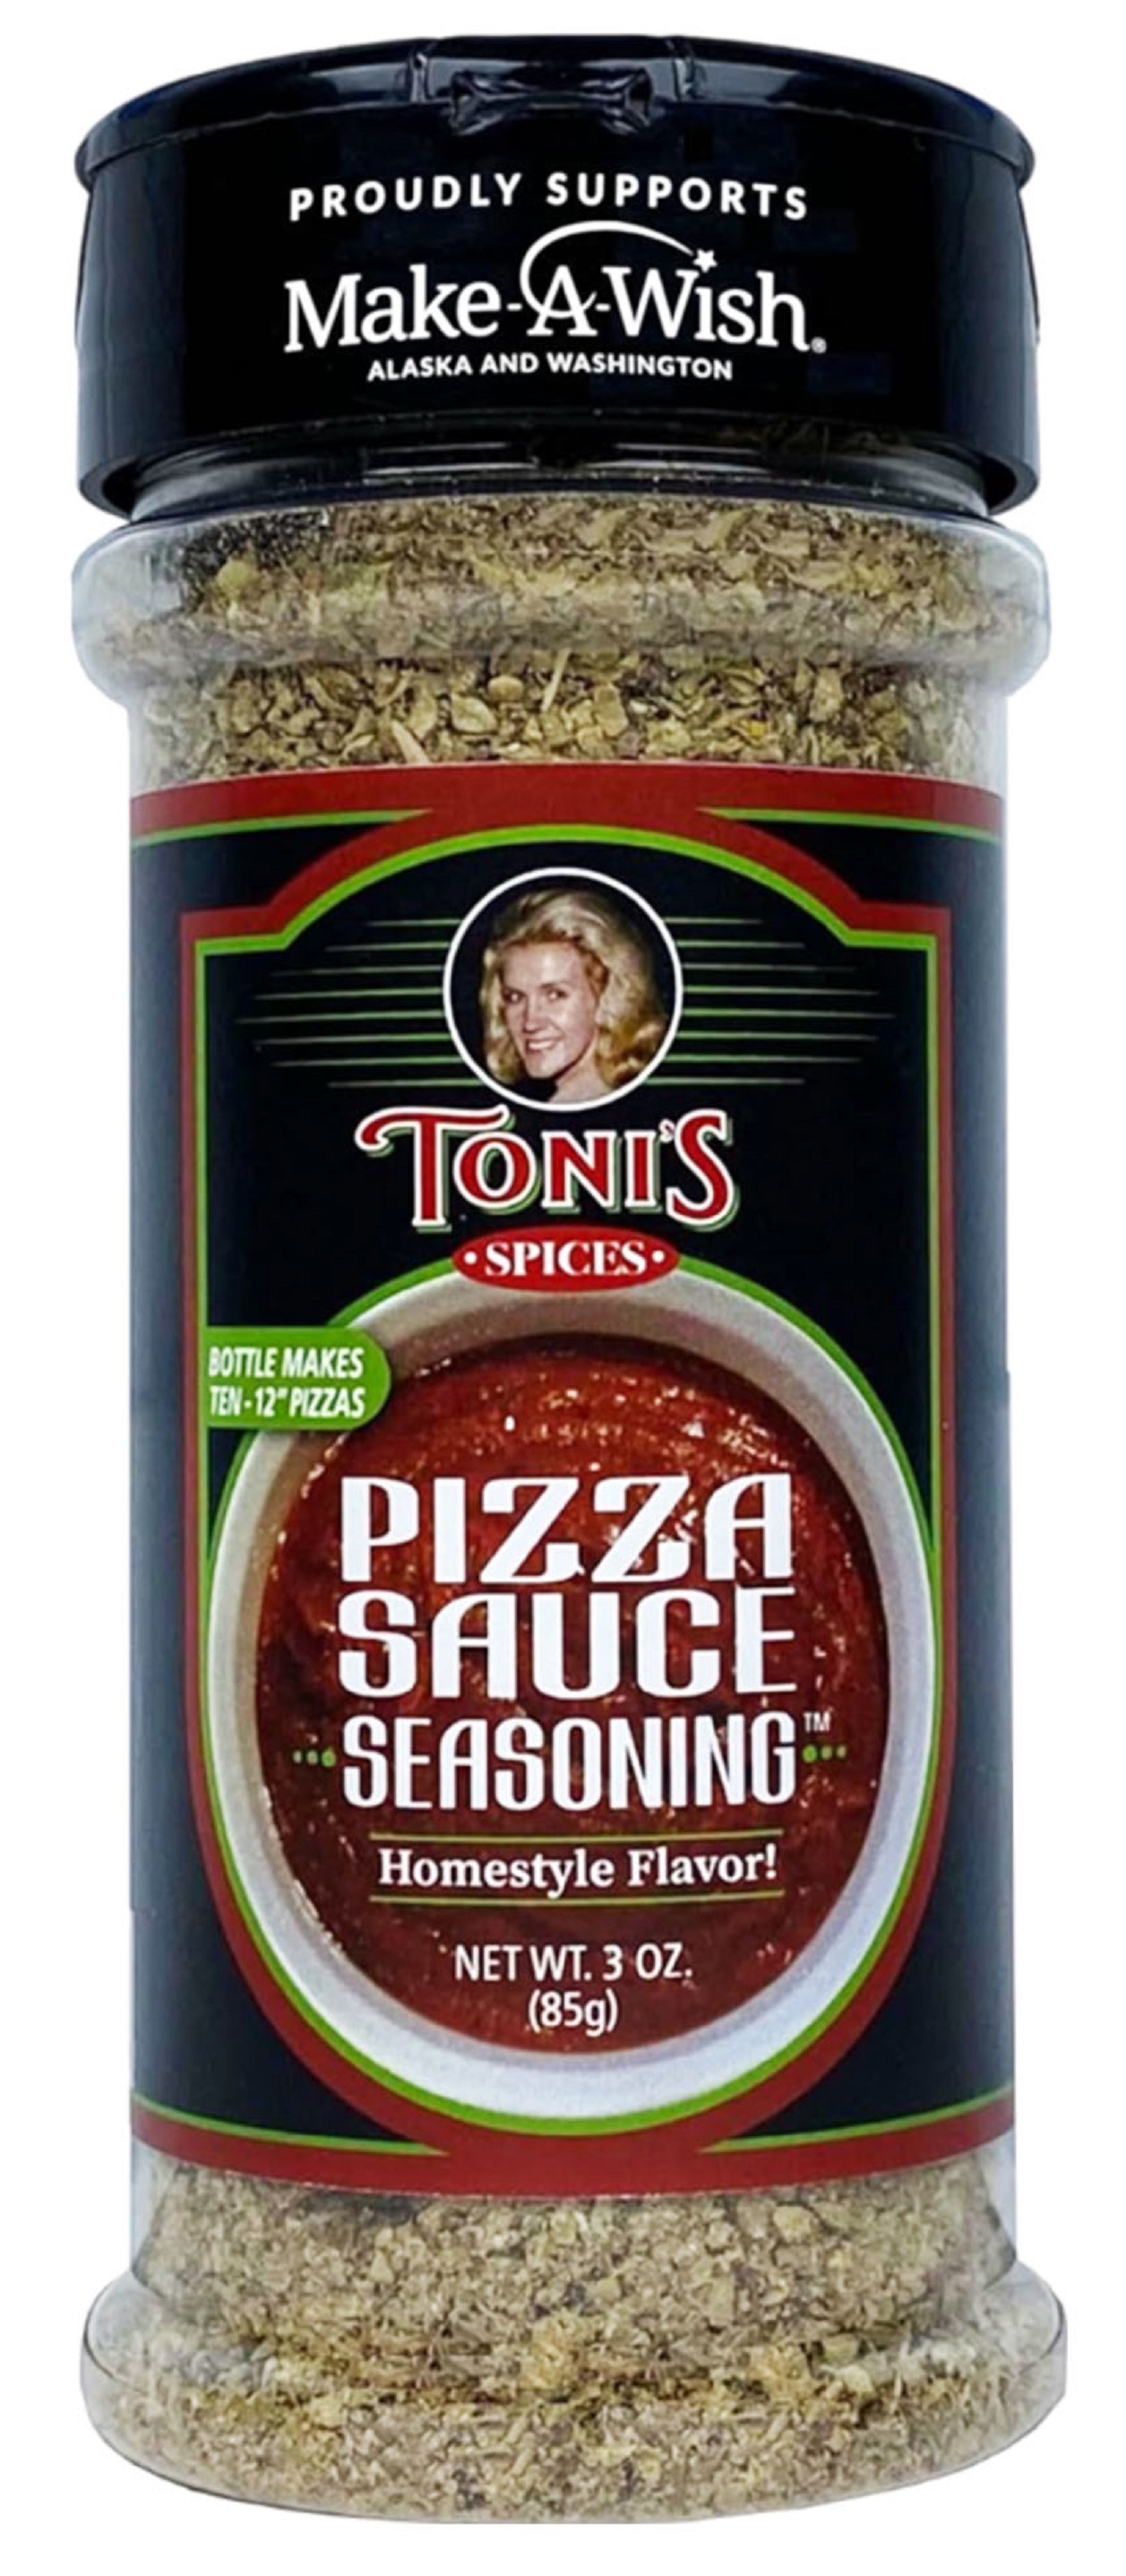 Tonisspices product front label